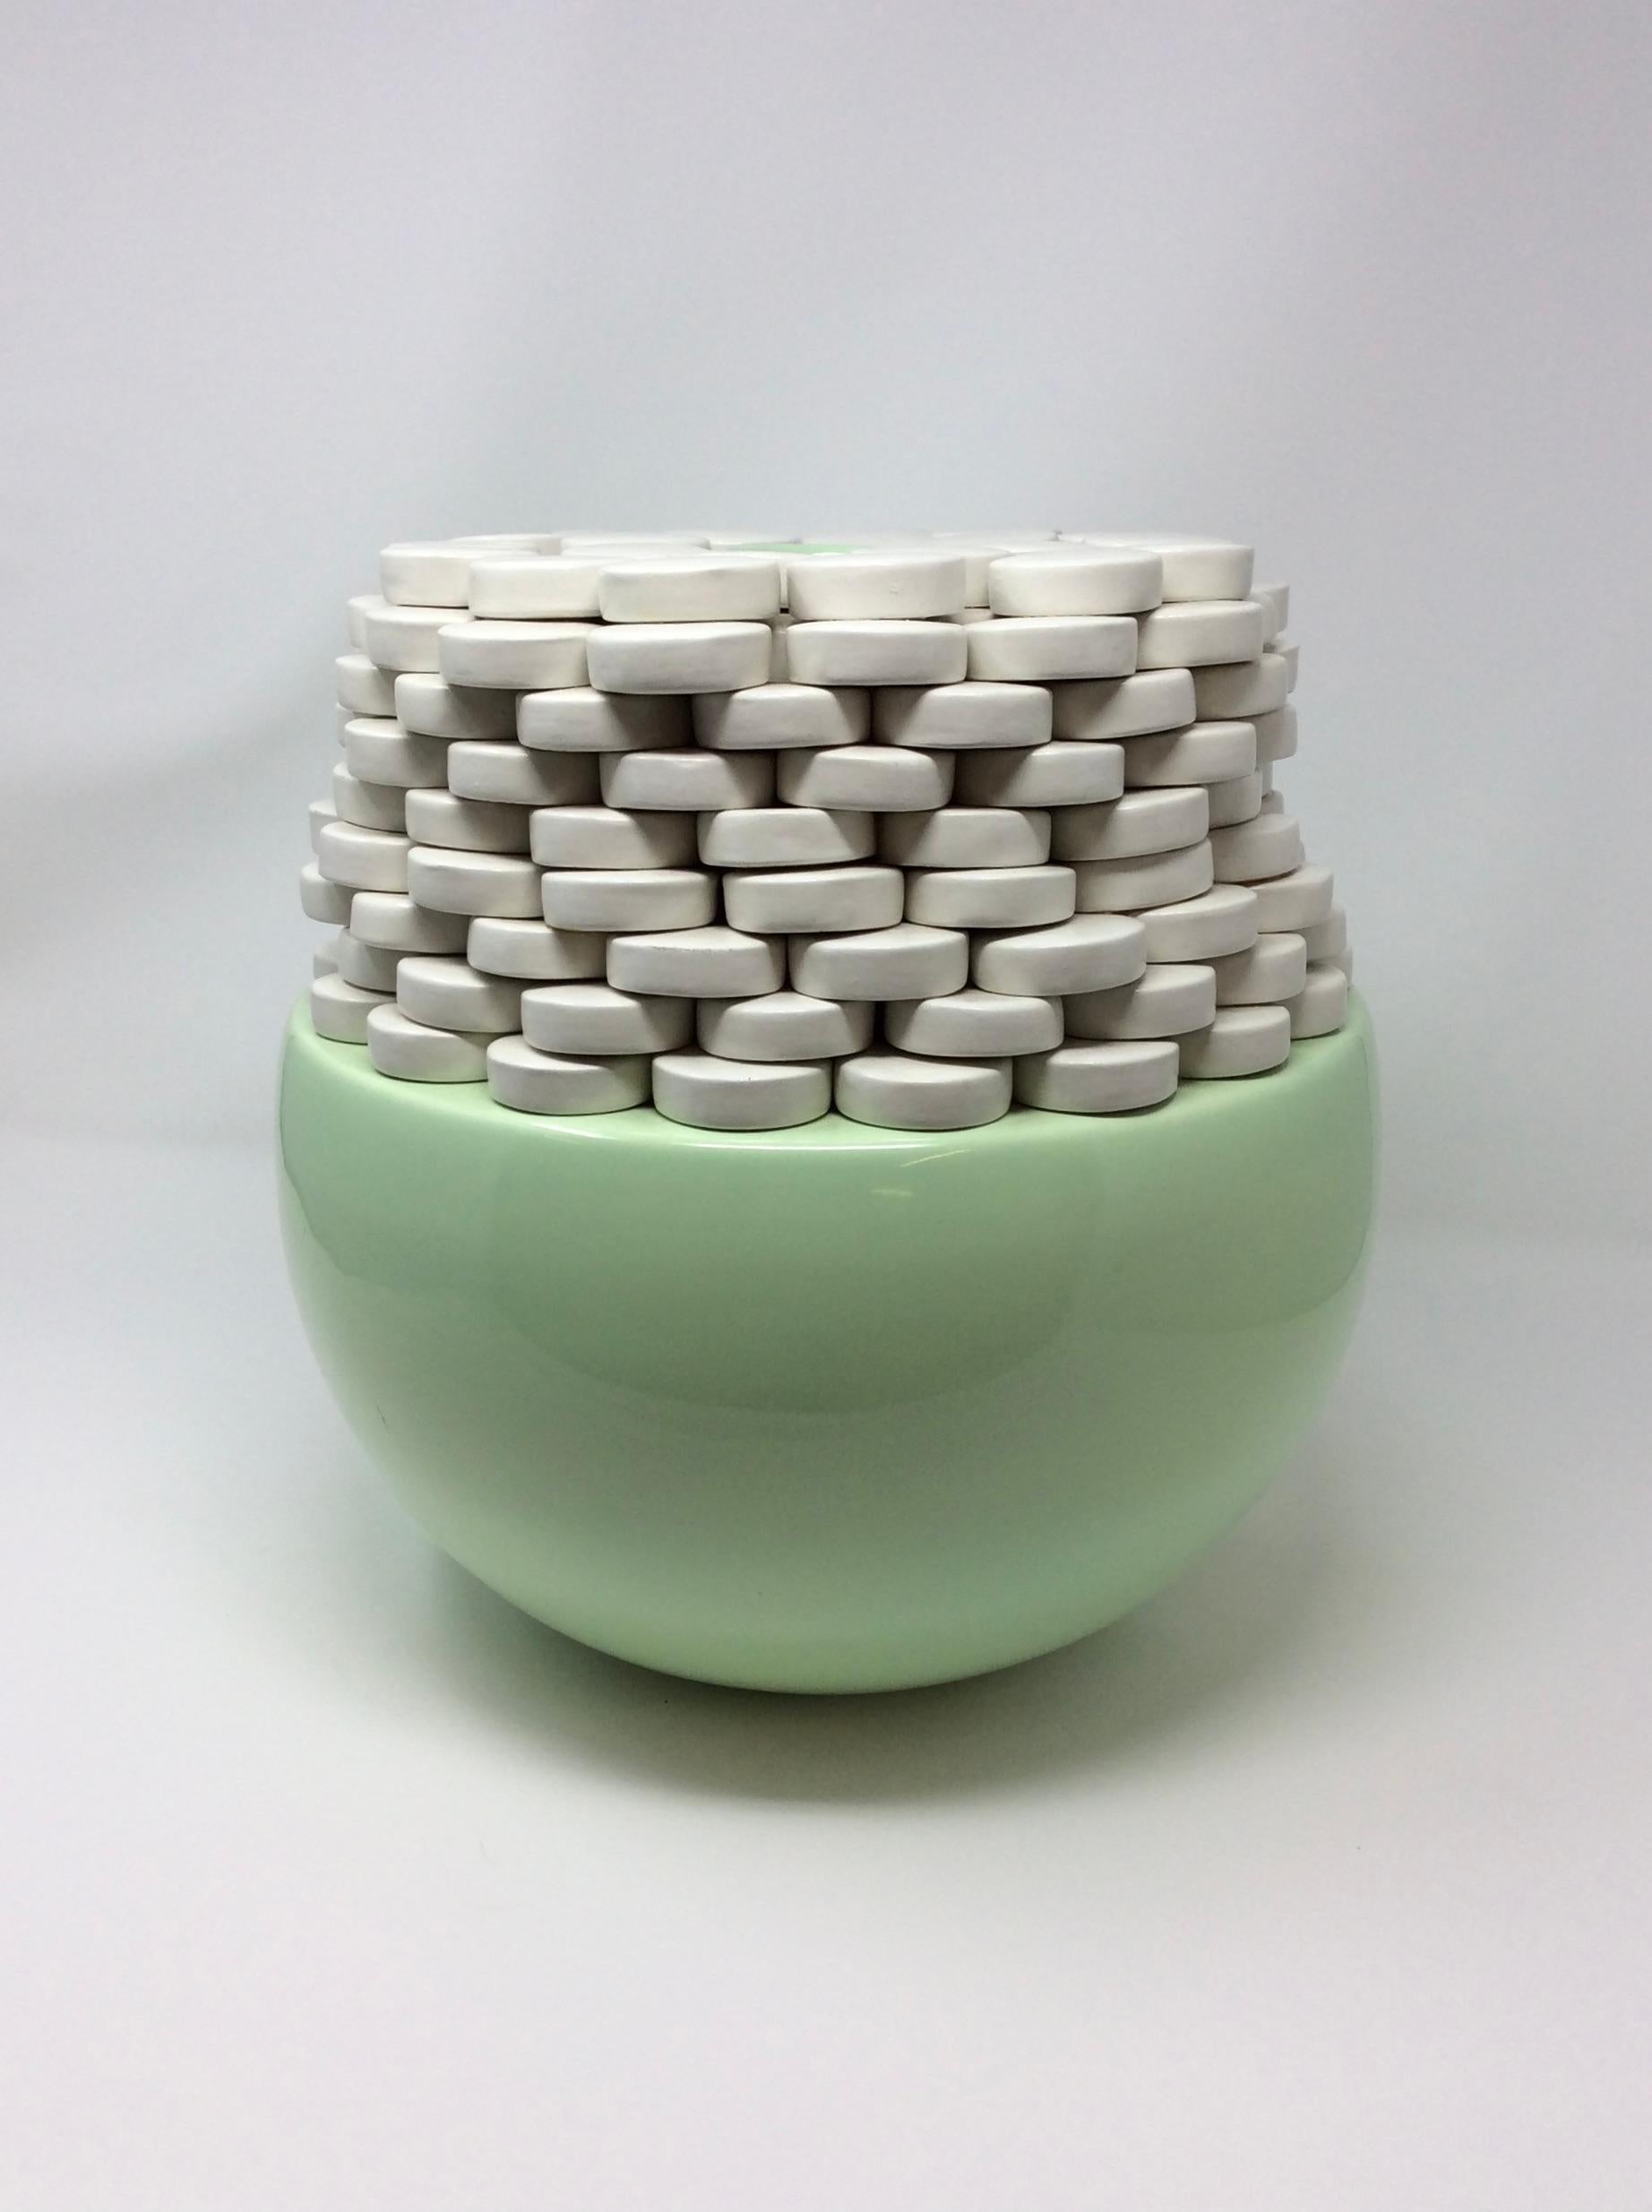 Ceramic sculptural vase, for Superego Editions, from the 'Roma' Collection
limited edition no. 19/20
glazed in celadon green and white
signed mark in facsimile, Superego mark, and numbered 19/20.